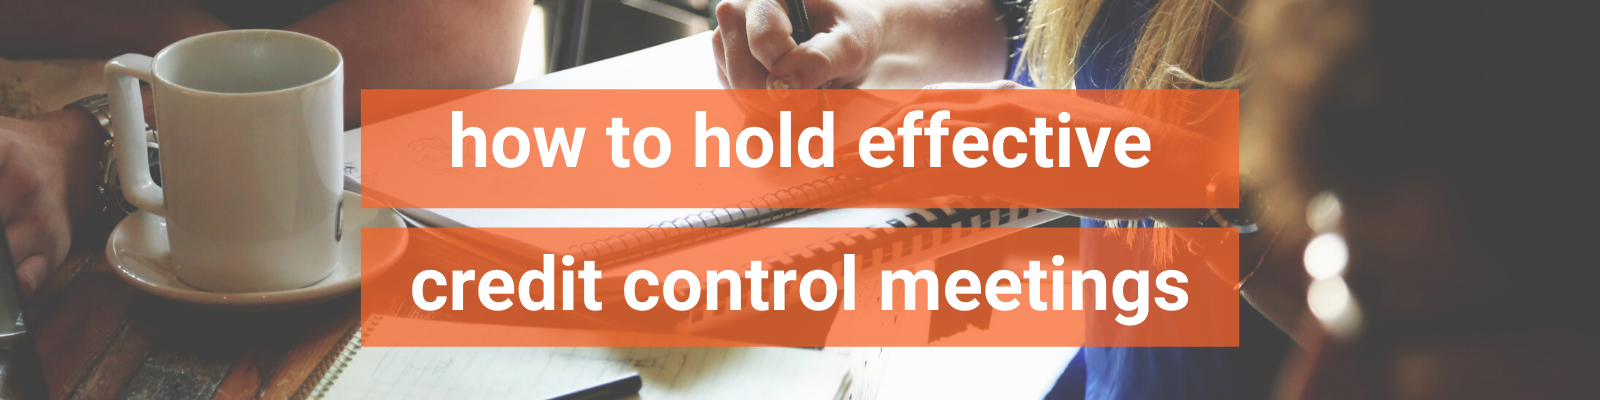 7 Tips for Holding Effective Credit Control Meetings in Your Finance Team